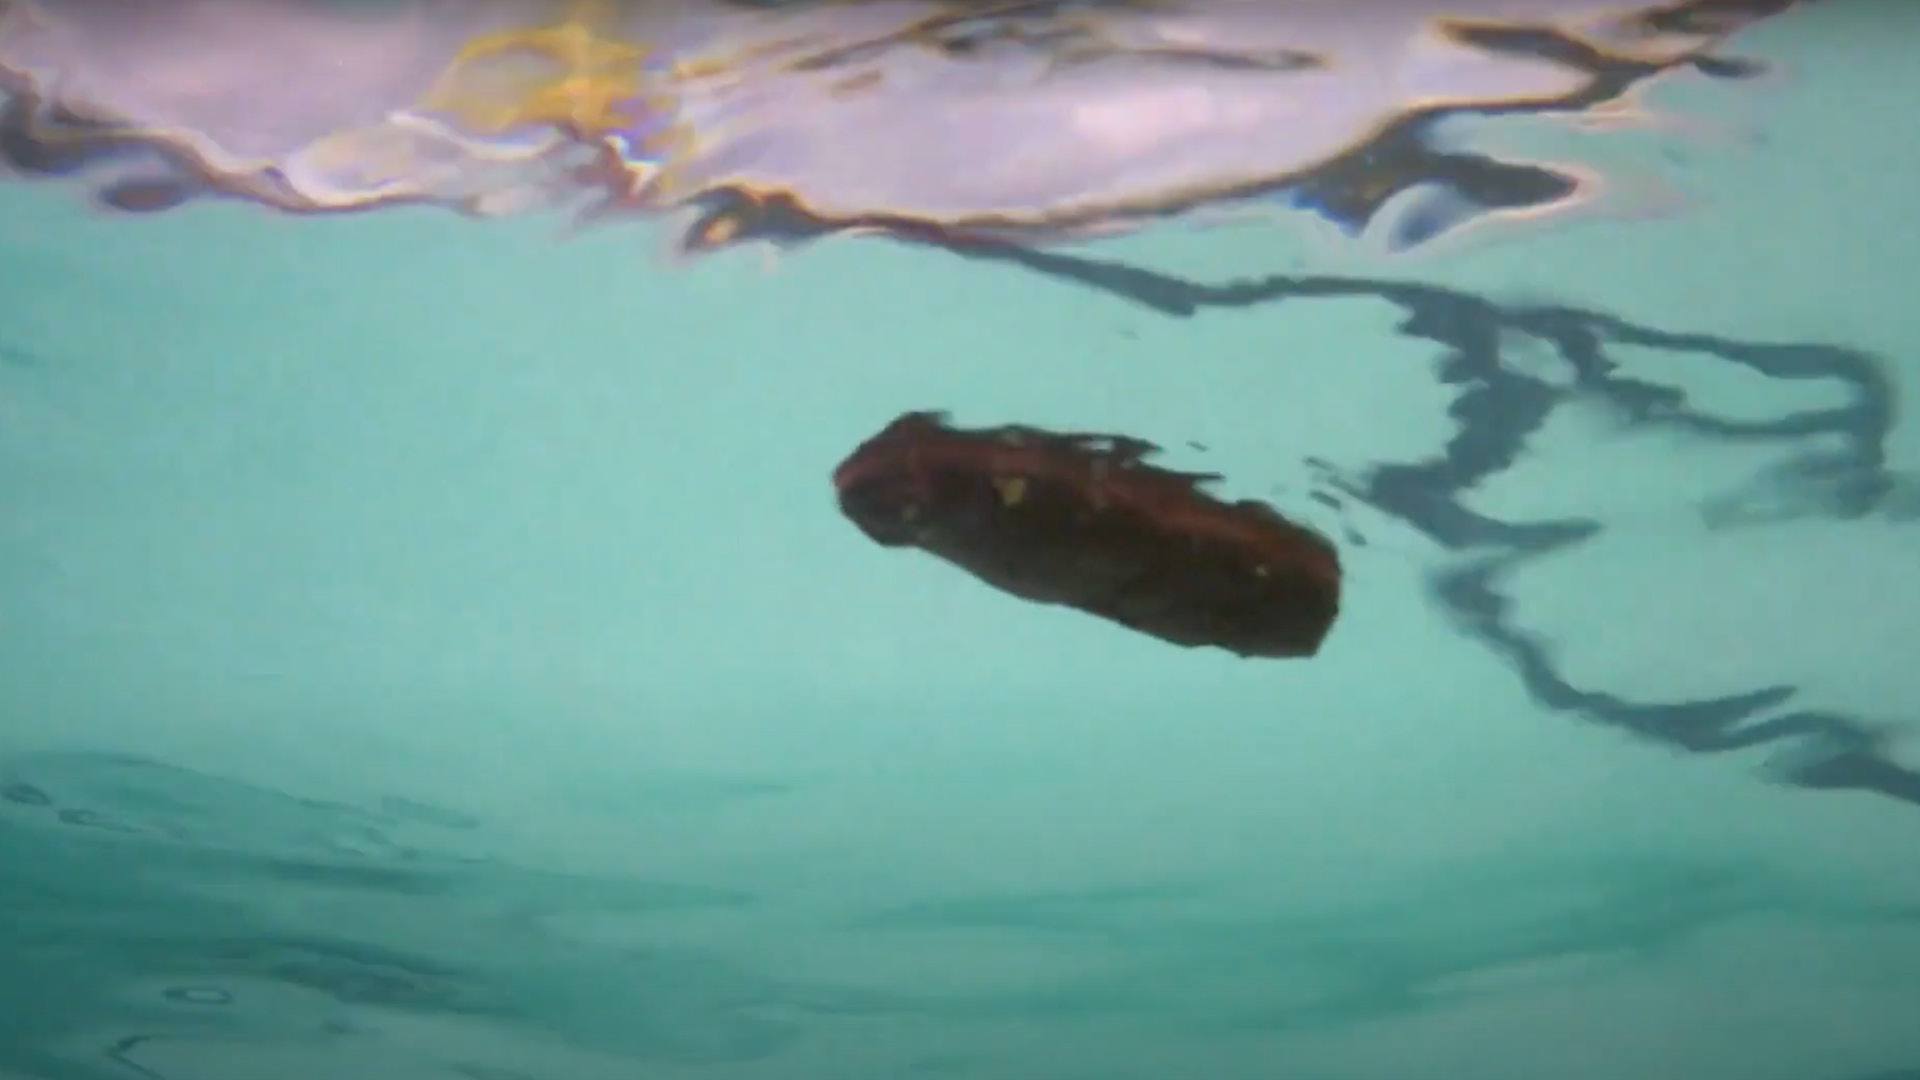 CADDYSHACK film still of a brown object floating in a pool